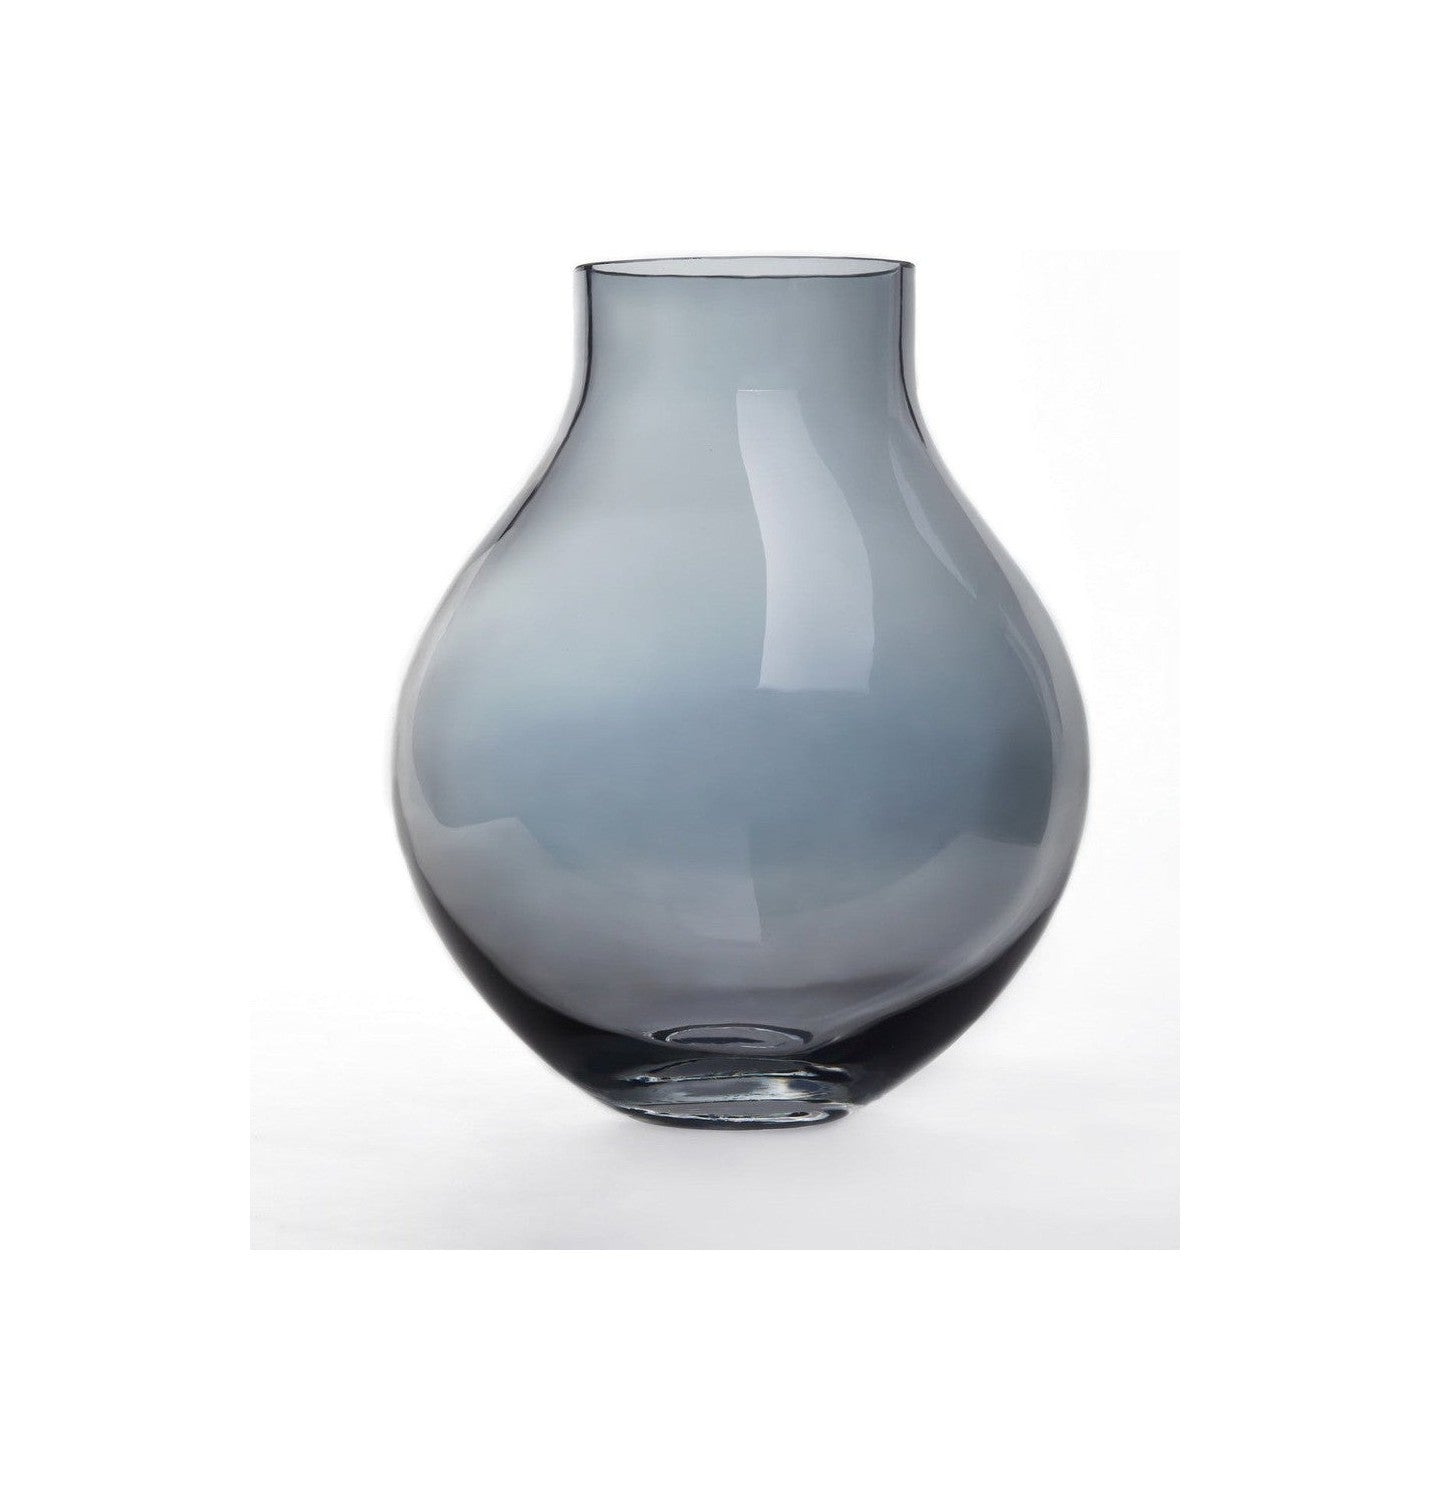 XL glass vase in bulb shape, 36cm tall, ENVIE 36SI, 9mm thick glass